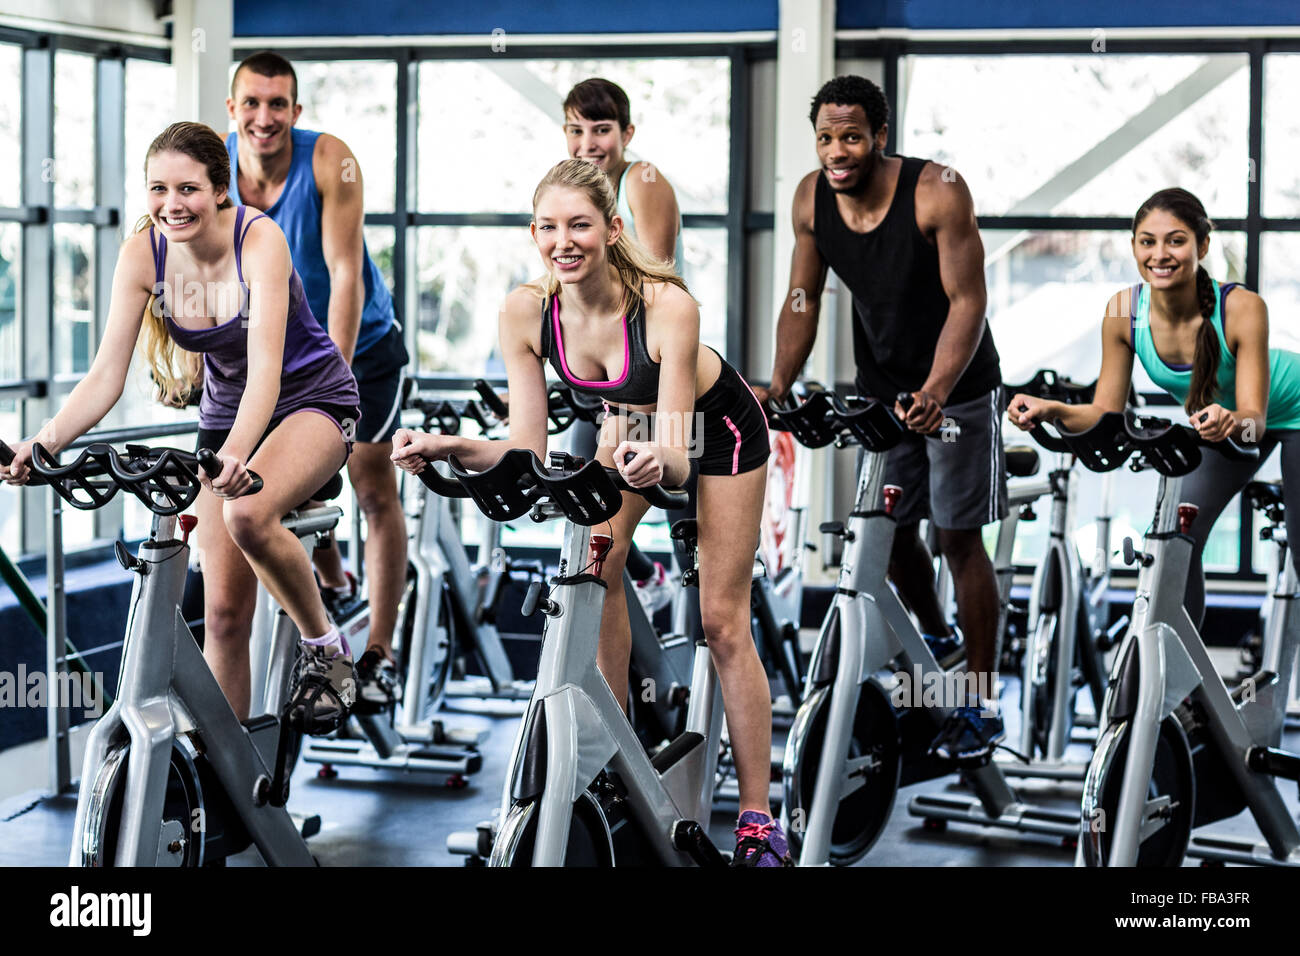 Fit people working out at spinning class Banque D'Images